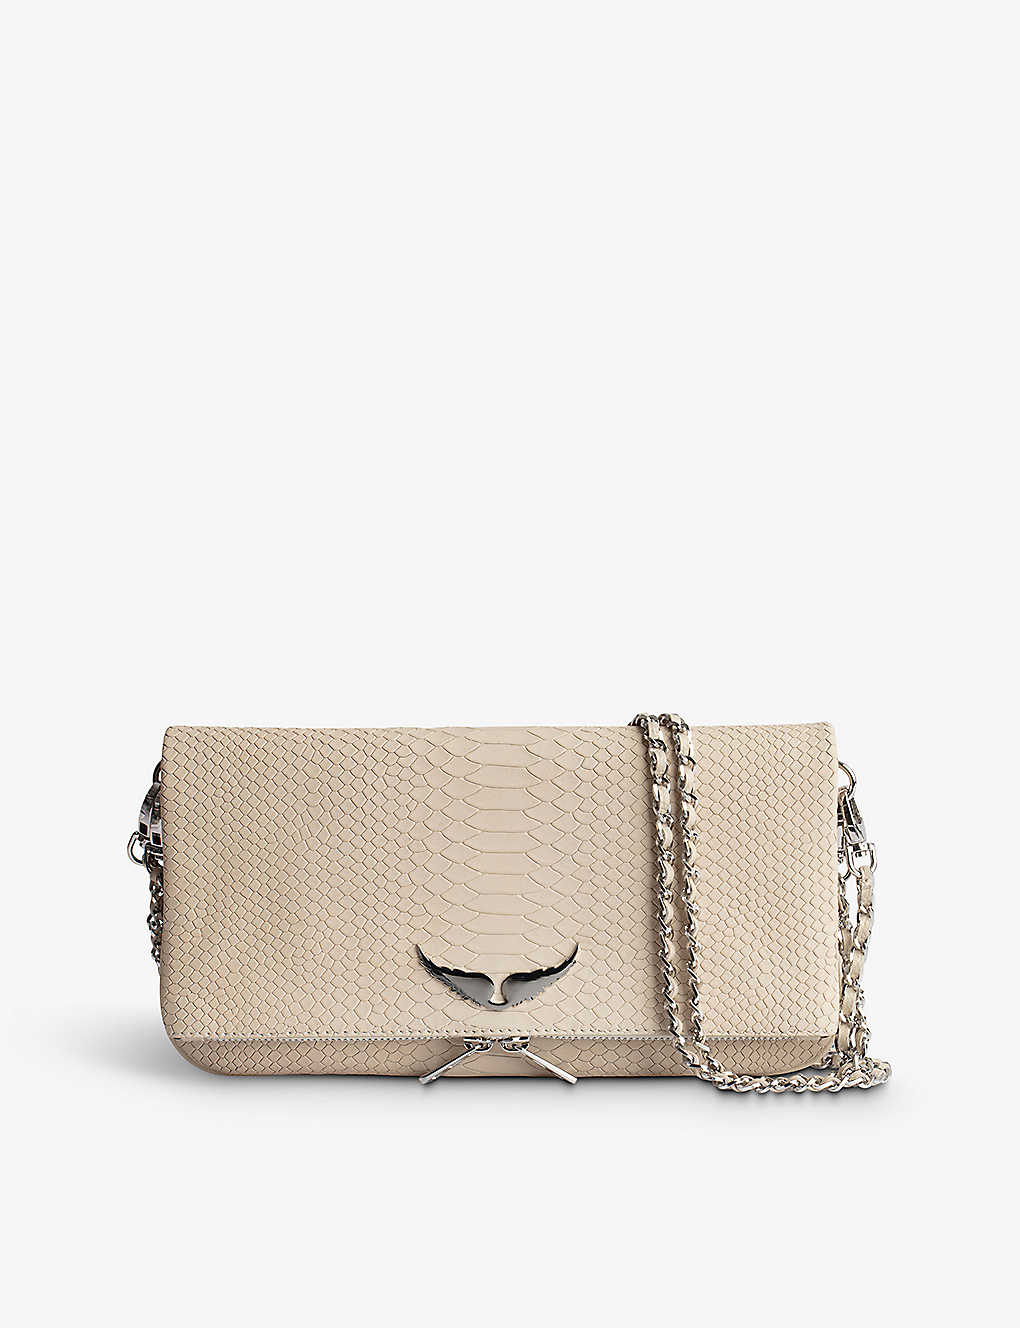 Zadig & Voltaire Rock Savage Flash Embossed Leather Clutch